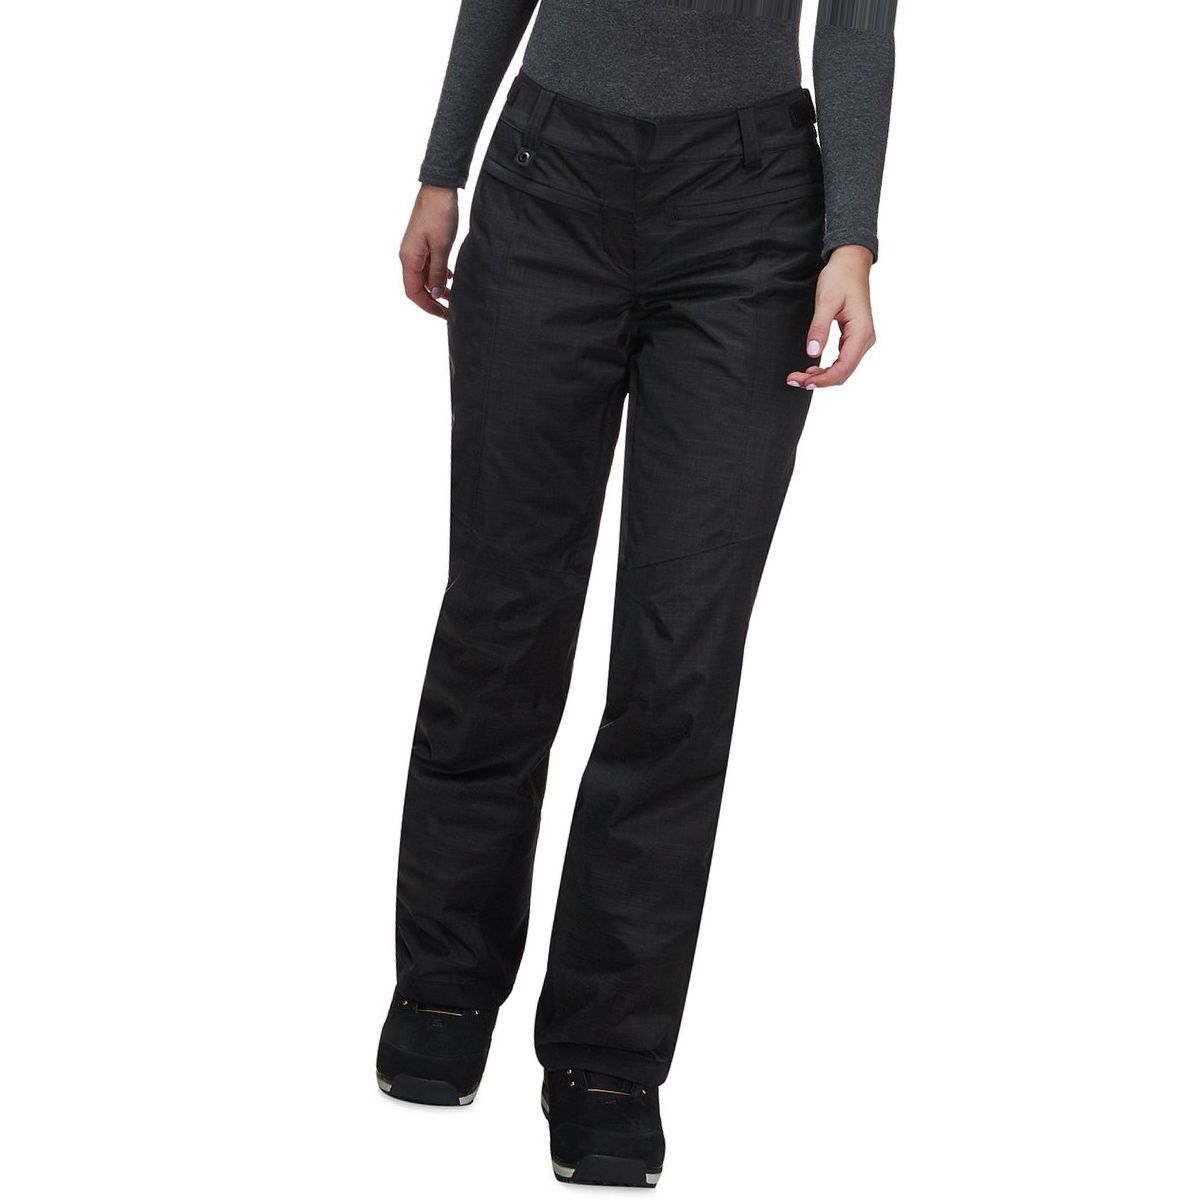 Under Armour Navigate Insulated Pant - Women's